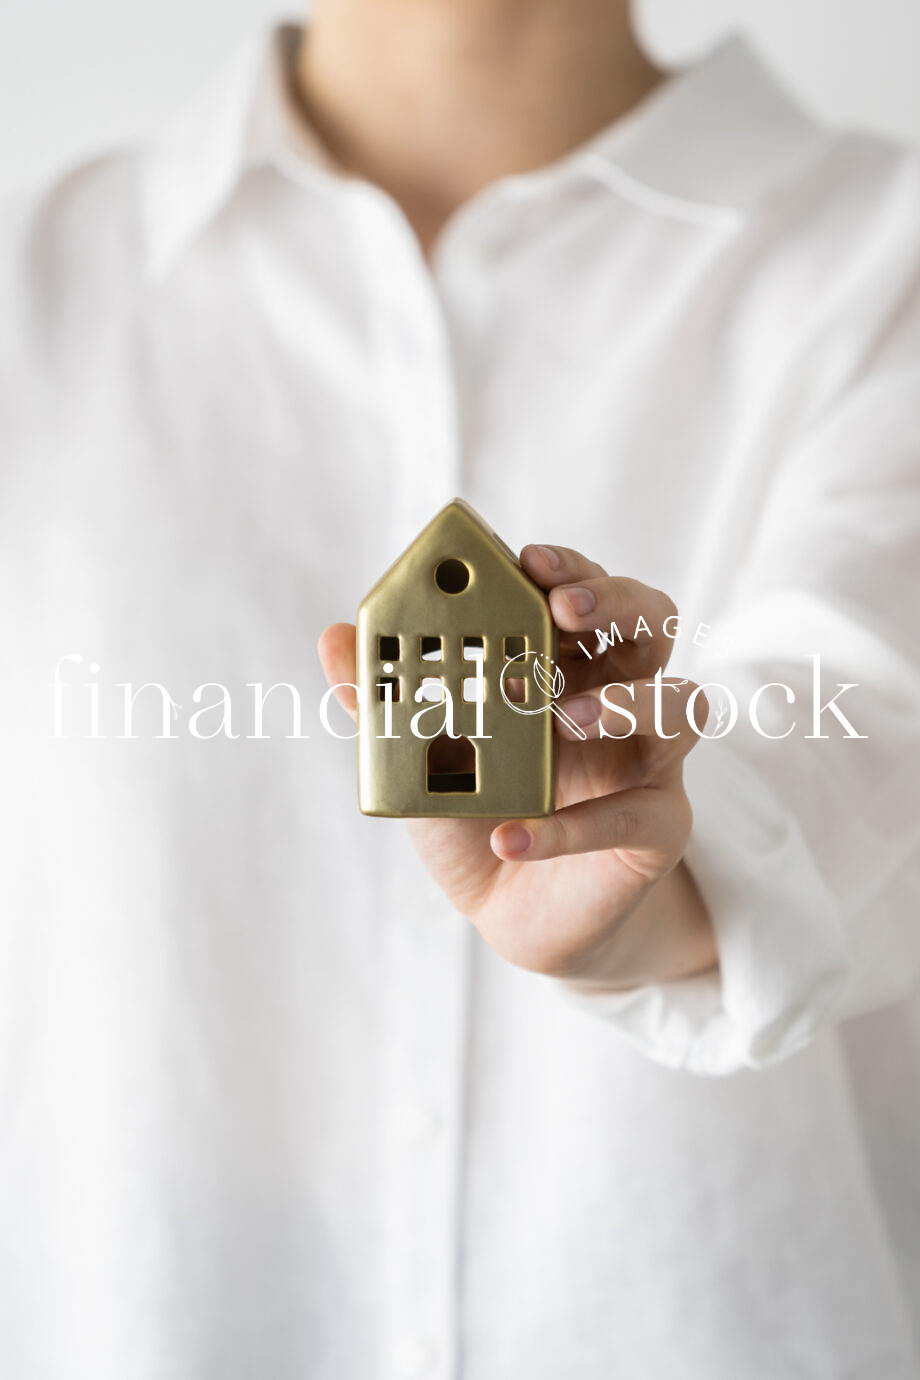 Financial Stock Images - Working from home-Housing finance and debt management